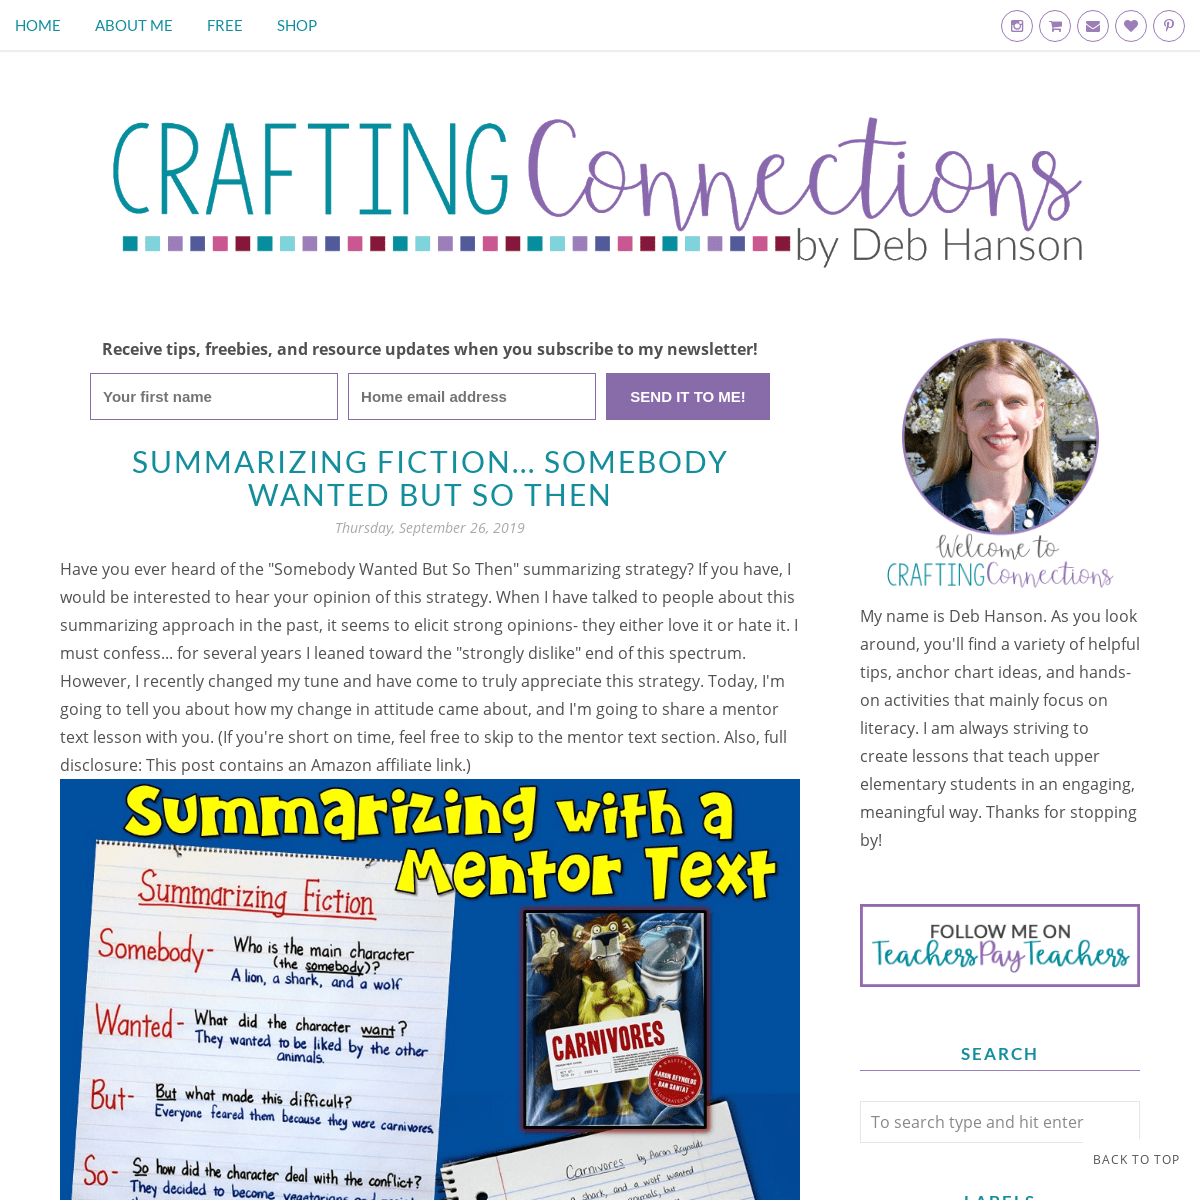 A complete backup of crafting-connections.blogspot.com